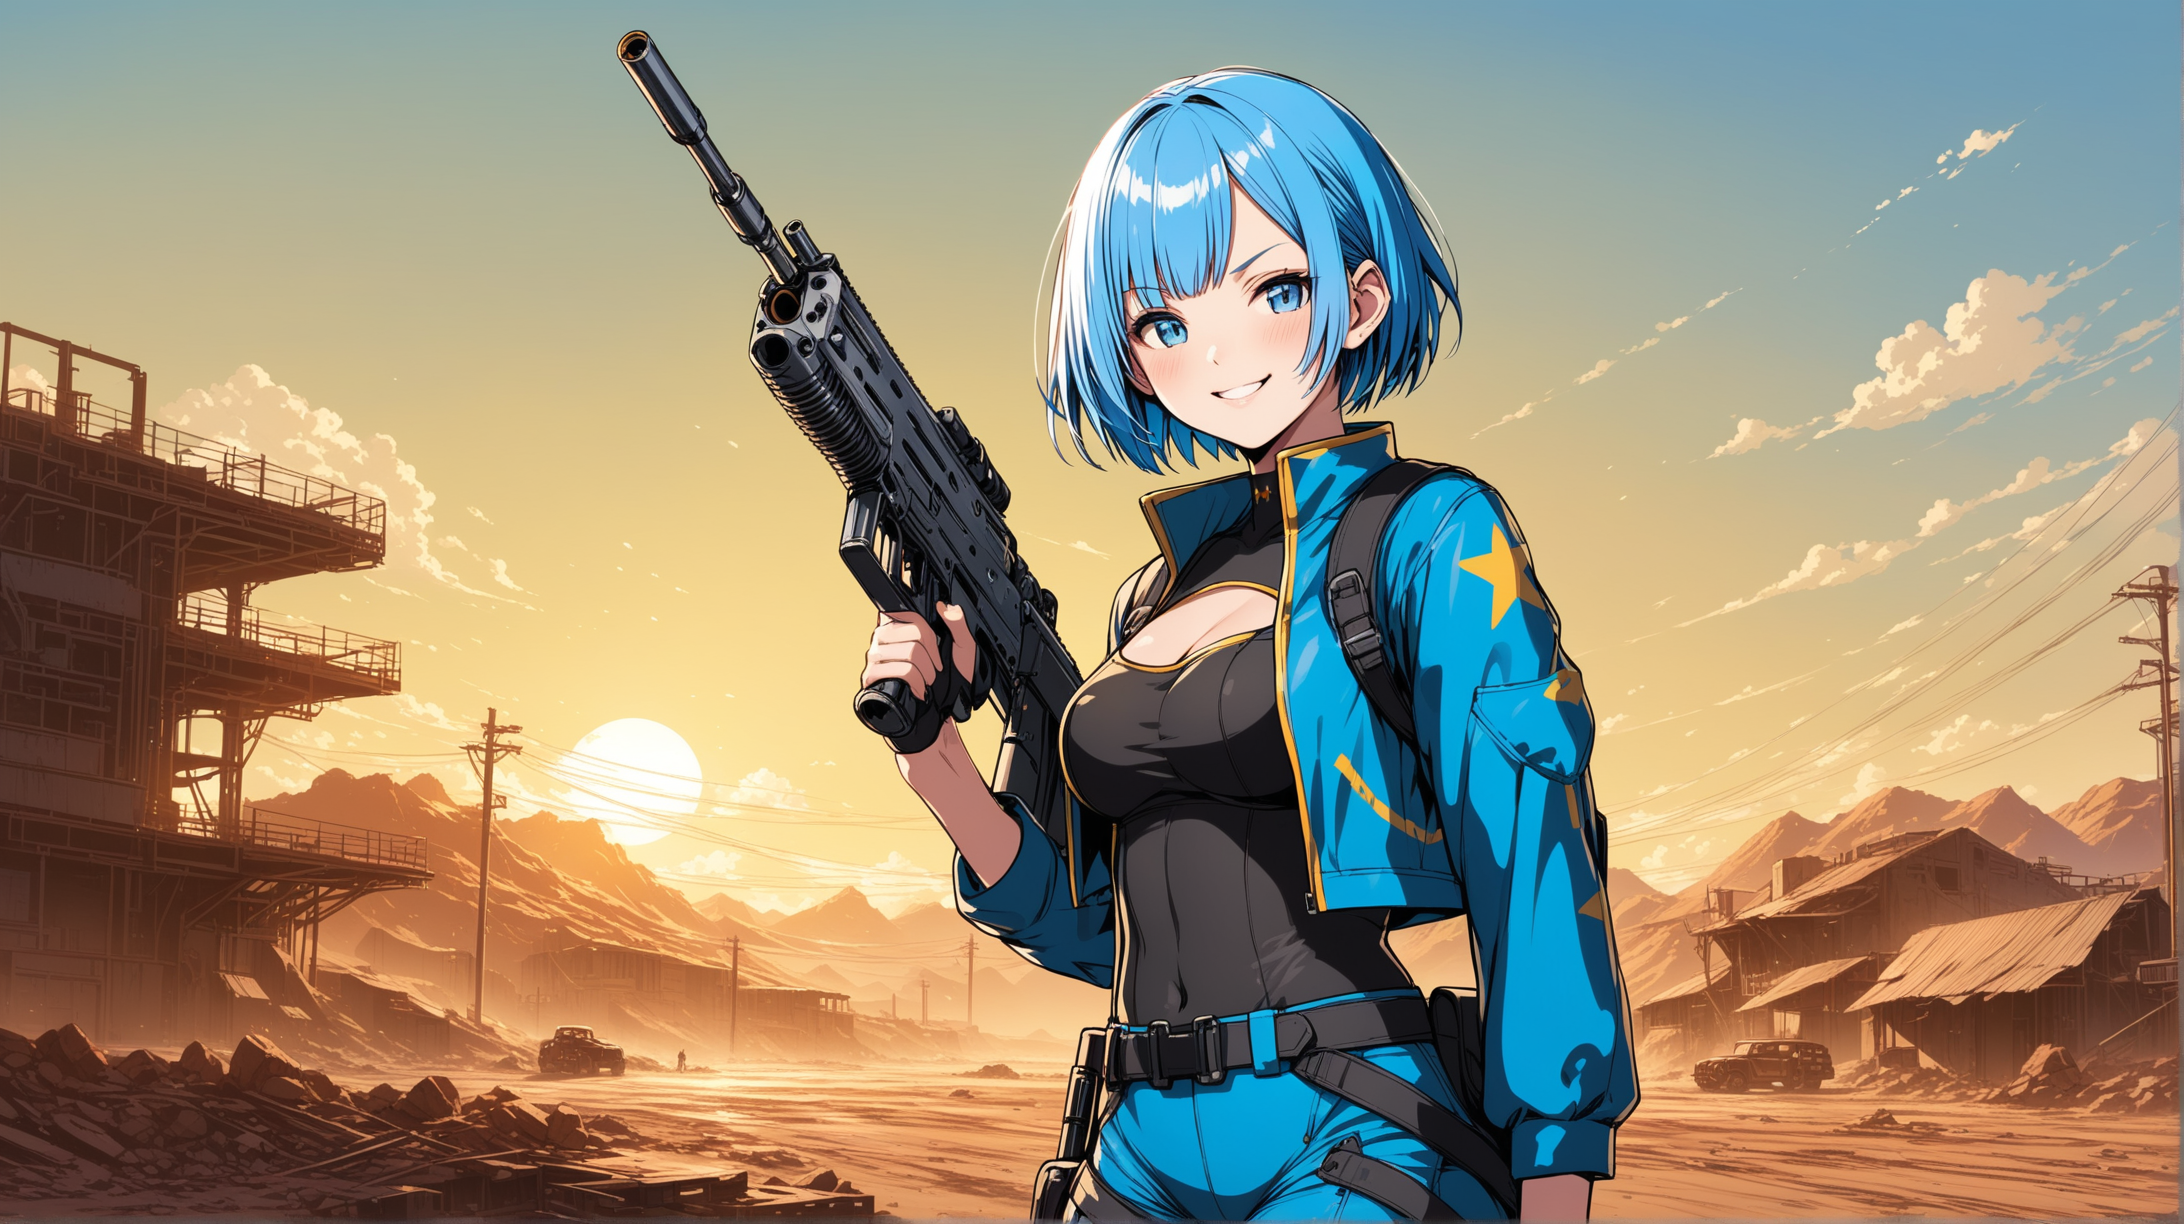 Draw the character Rem, high quality, in a confident pose, outdoors, holding a modern weapon, wearing an outfit inspired from the Fallout series, smiling at the viewer